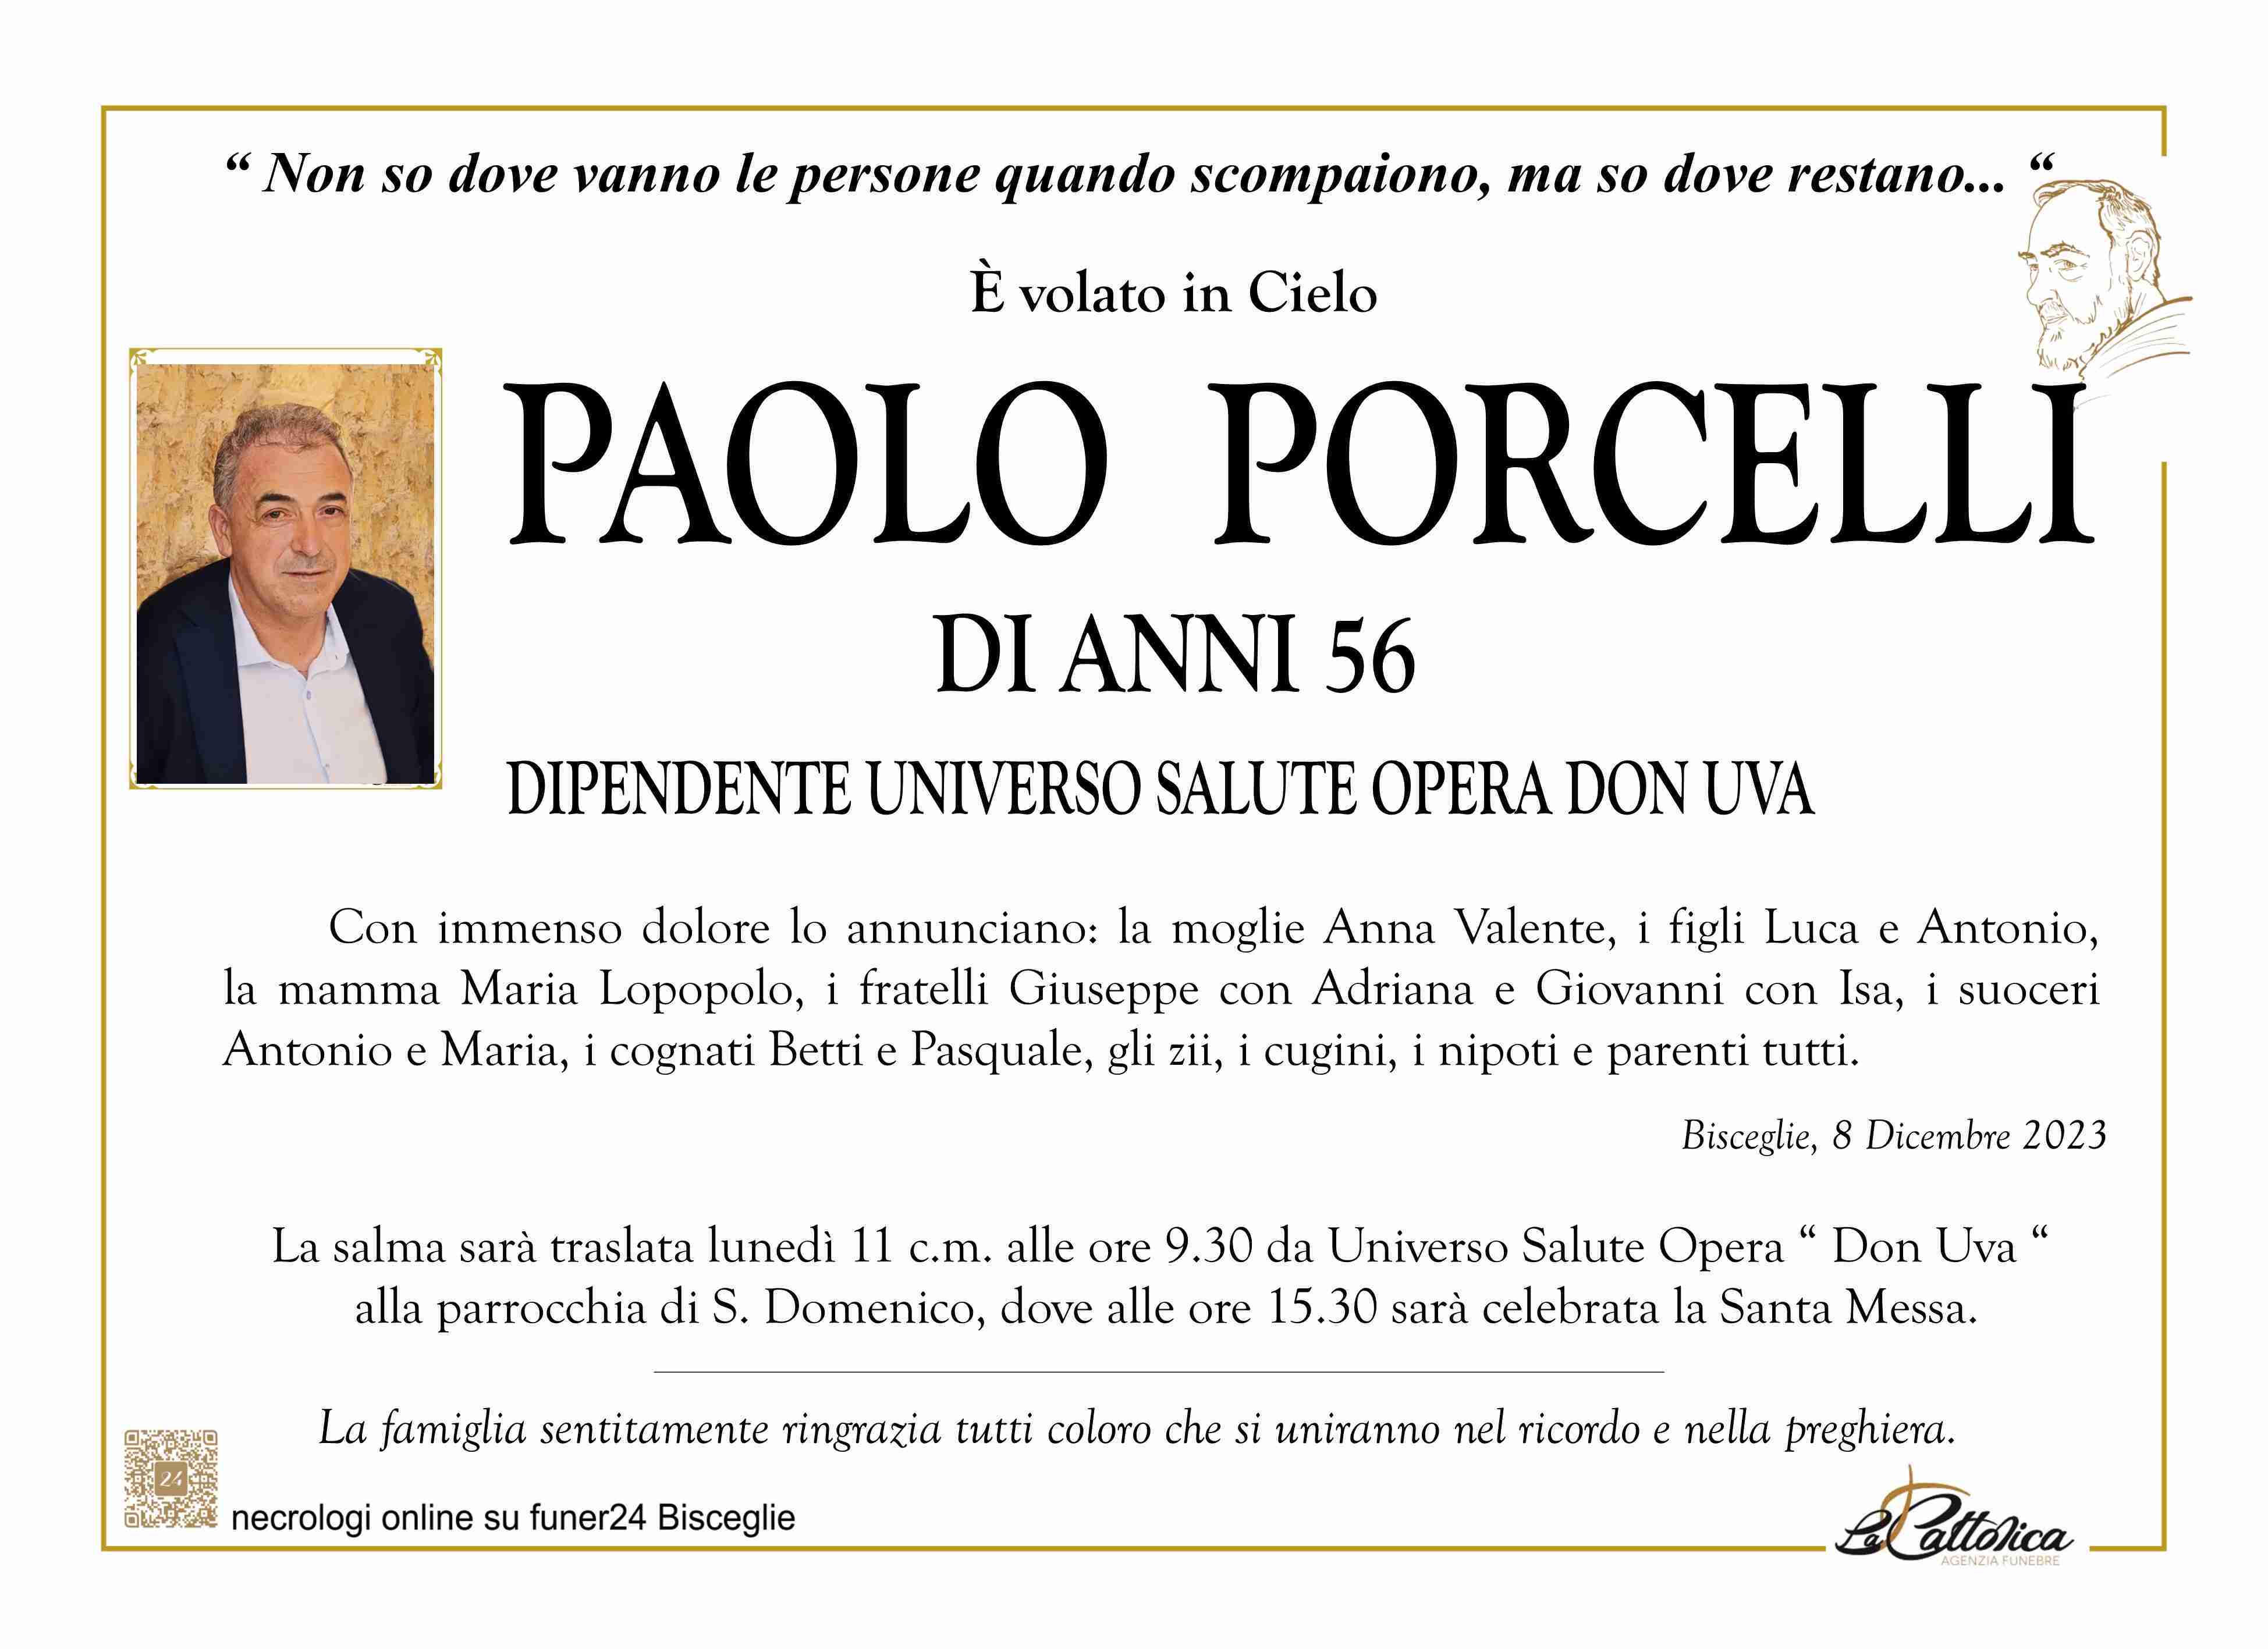 Paolo Porcelli